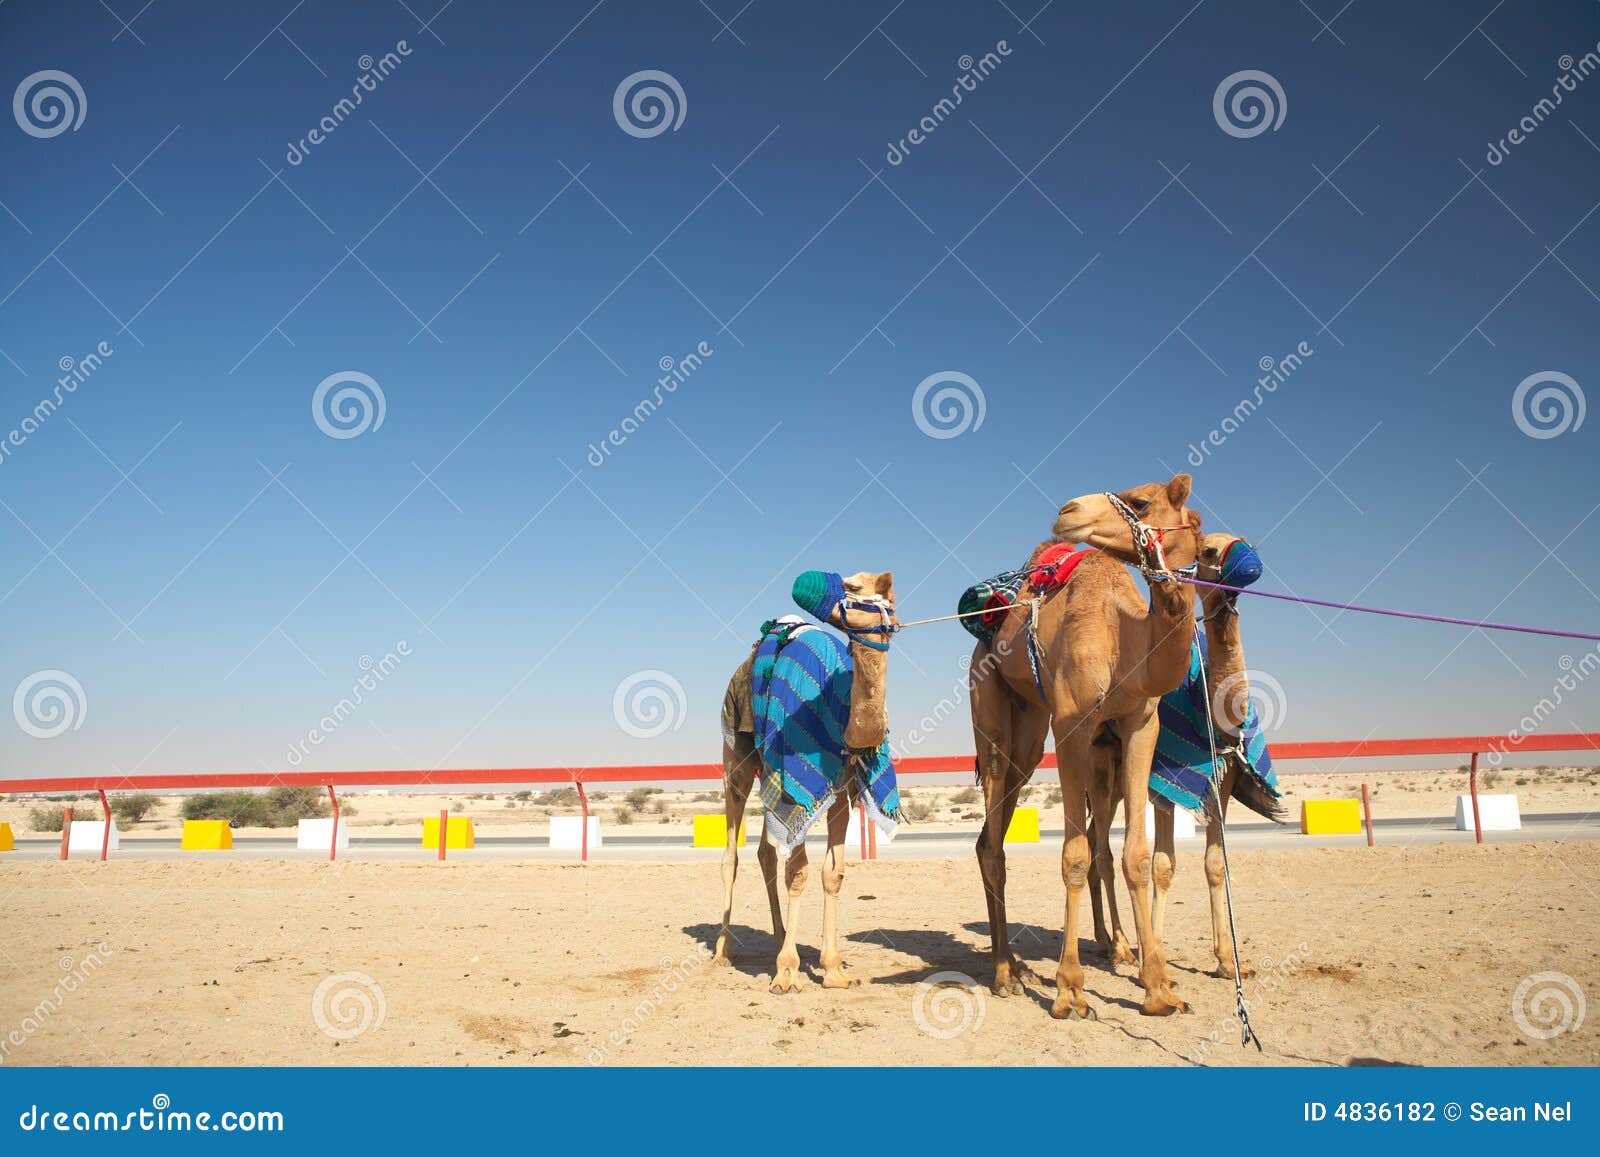 Robot controlled camel racing in the desert of Qatar, Middle East, on 